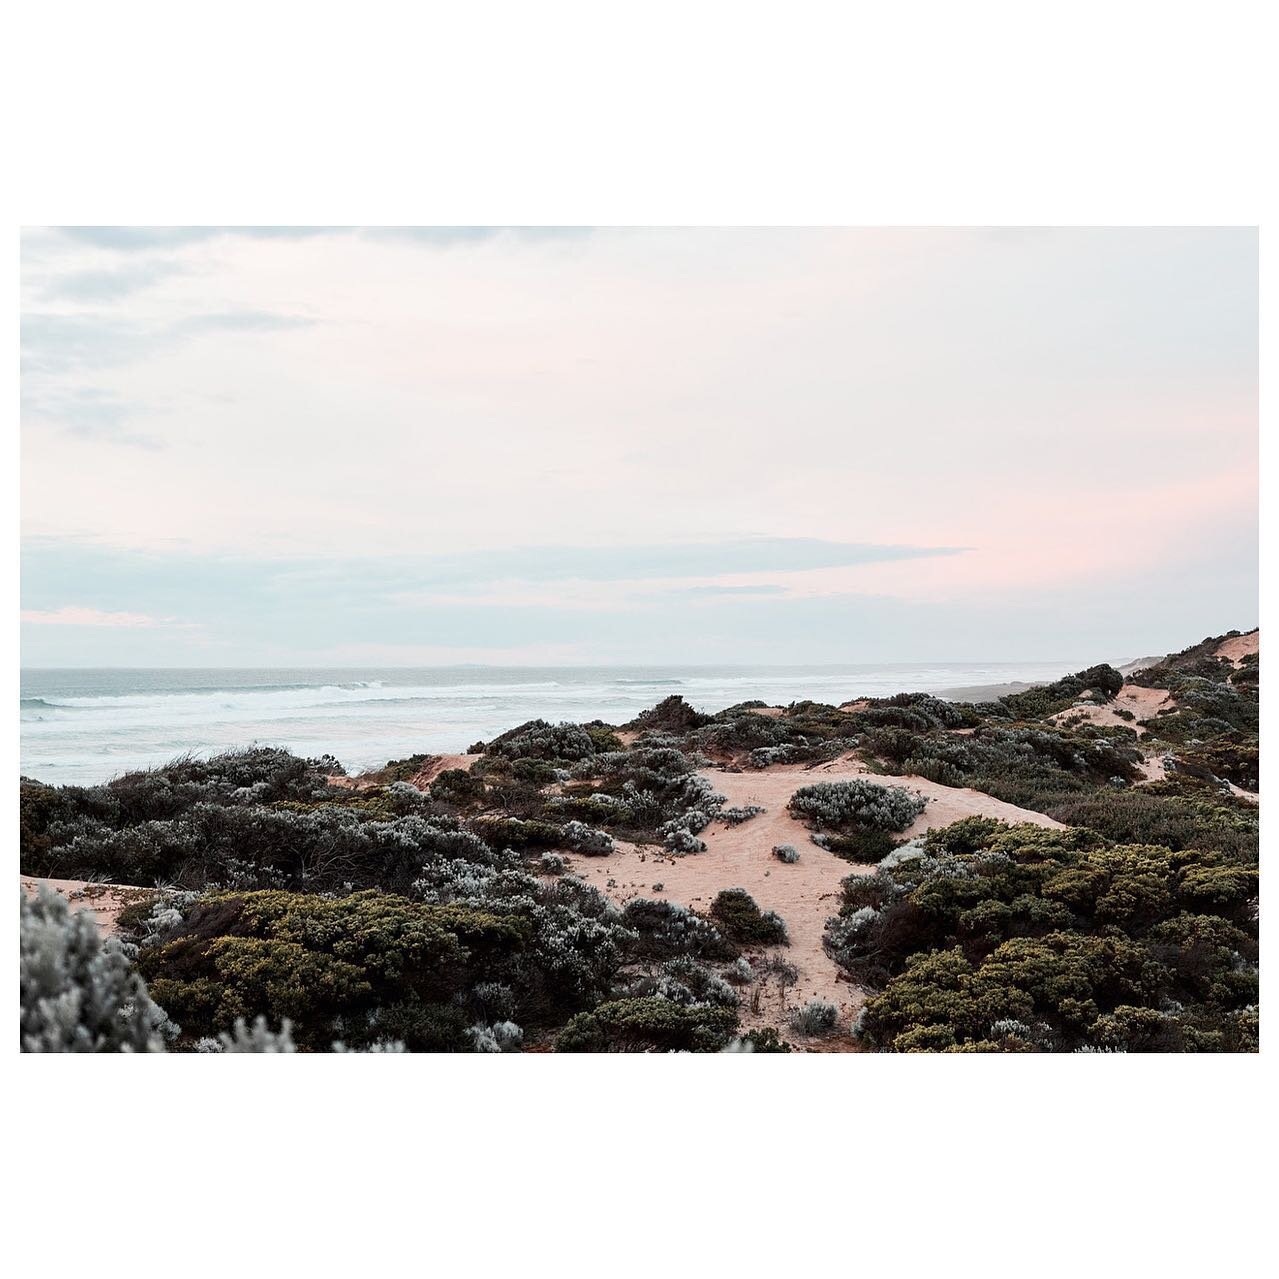 Capturing the raw beauty of the Mornington Peninsula for the mind blowing @albathermalsprings 

Creative Agency - HERO
Photo @christopher_mcc